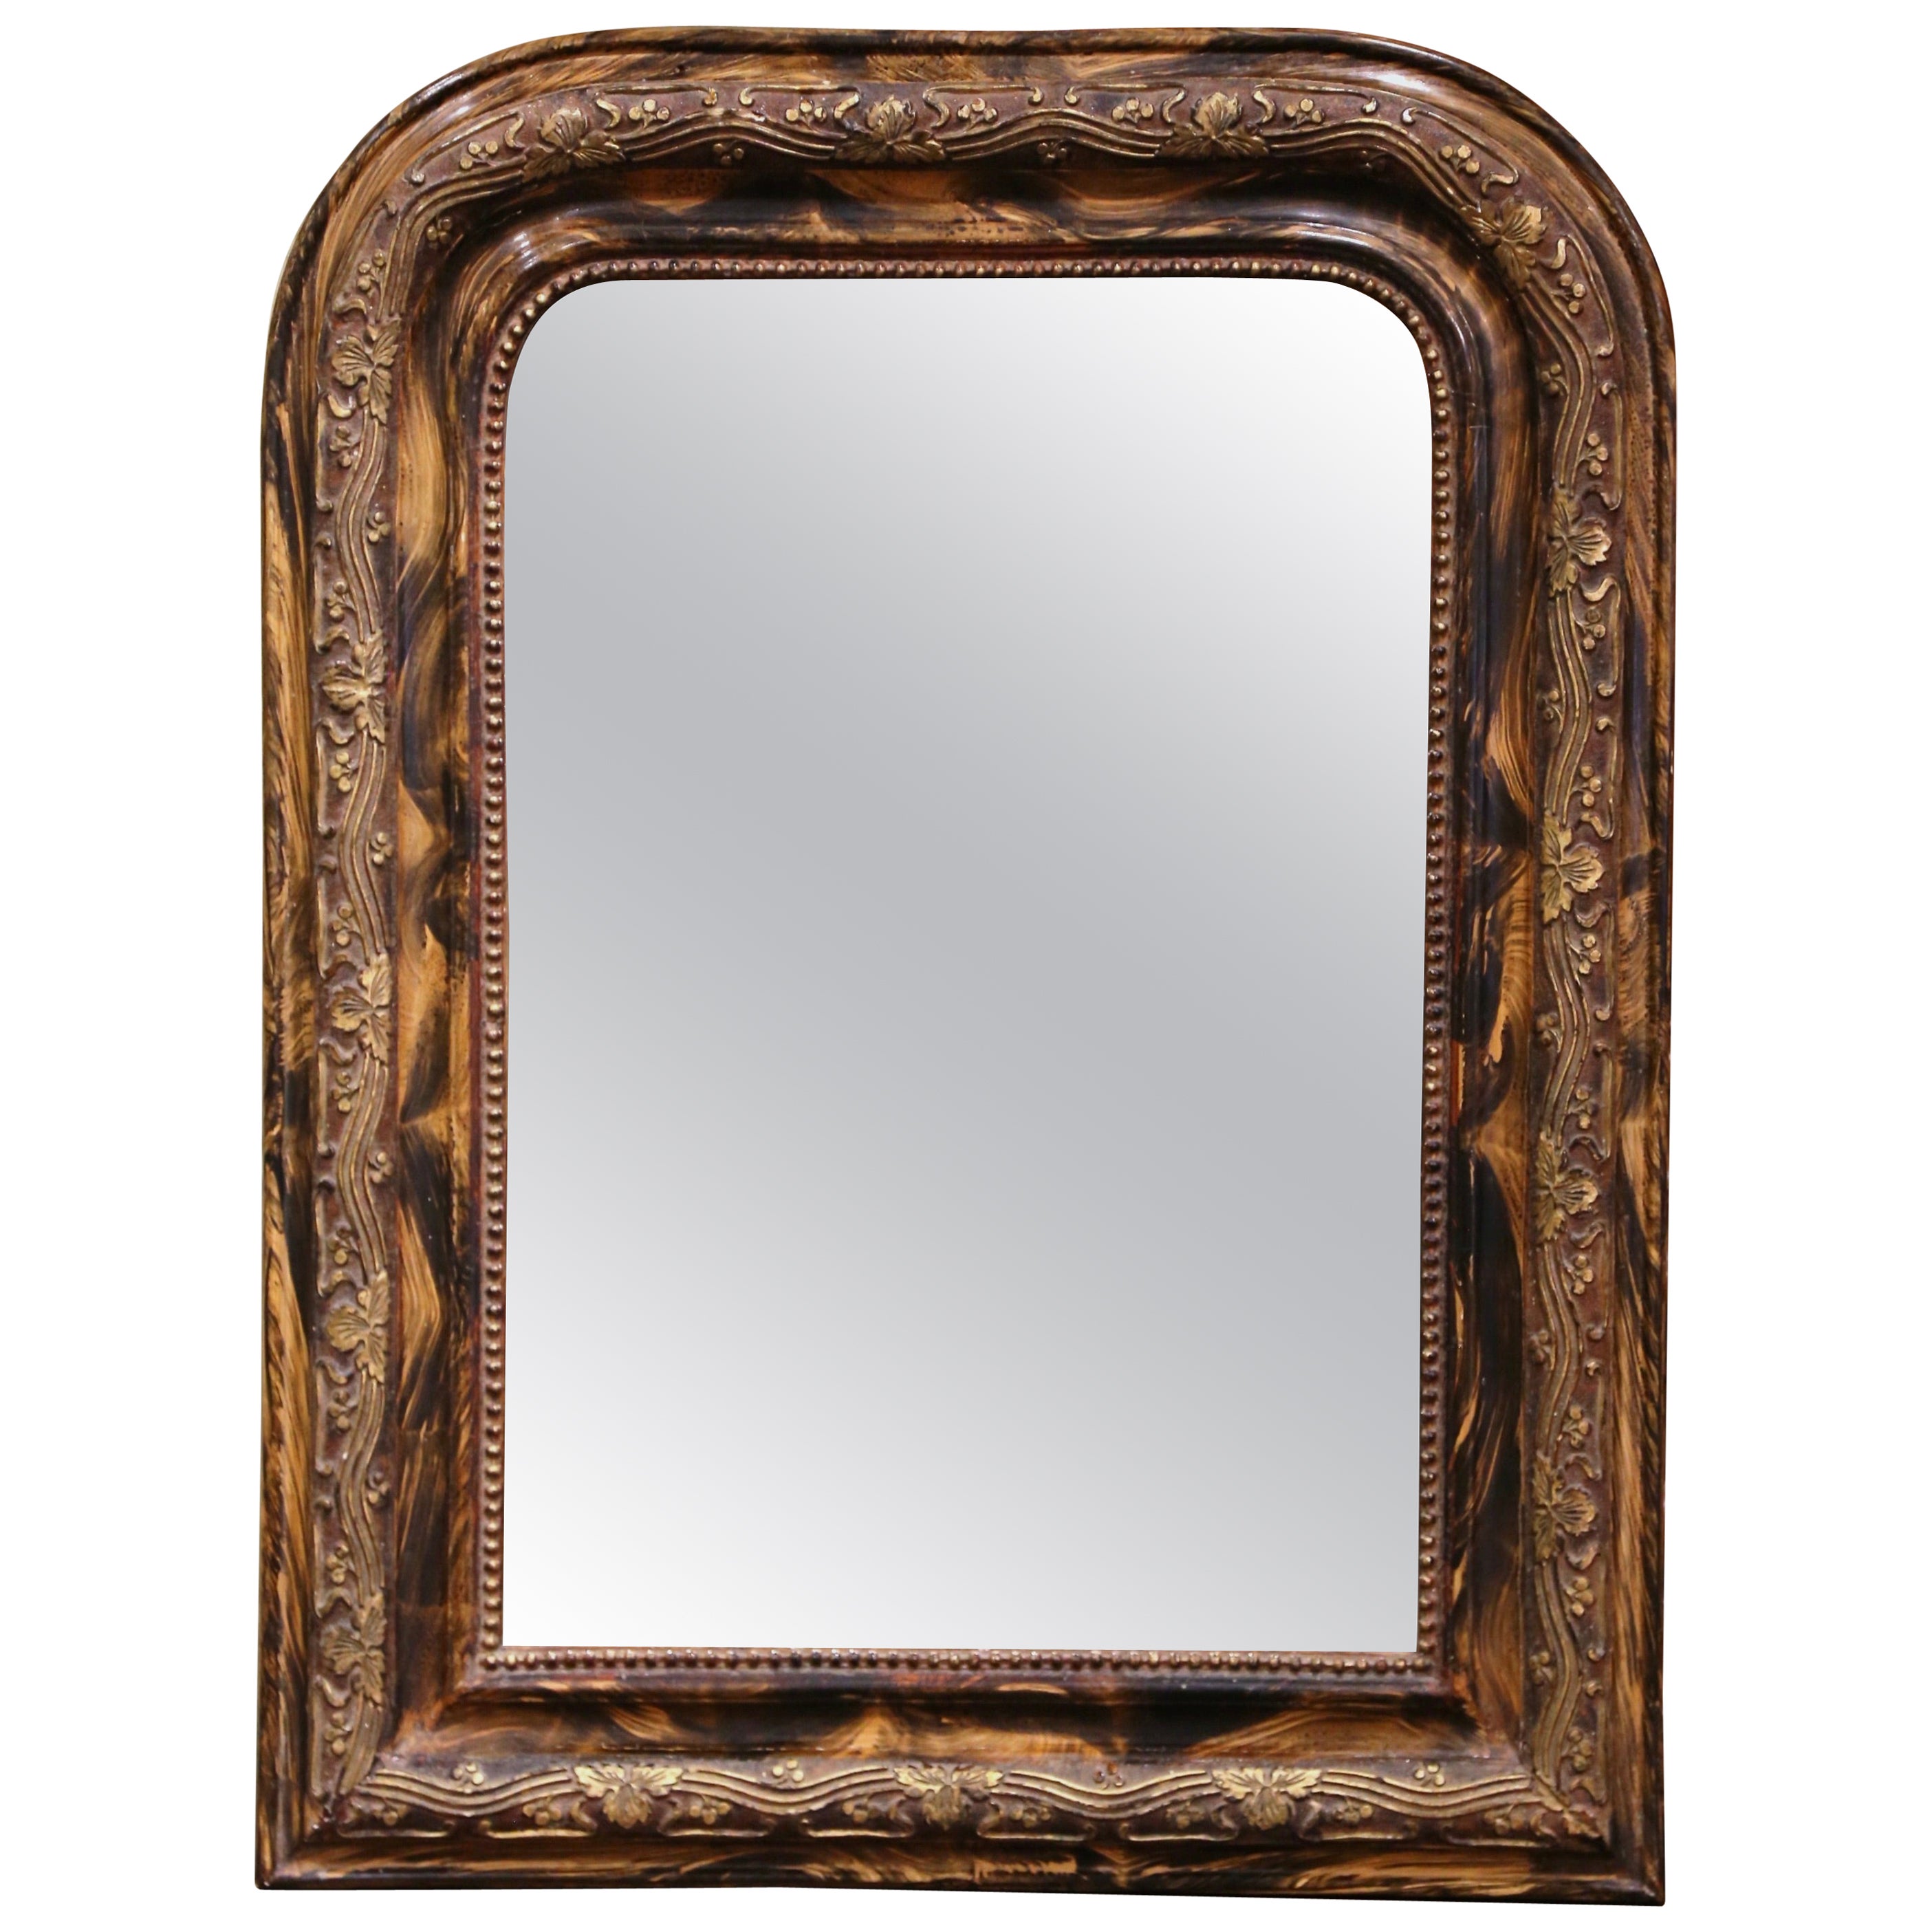 19th Century Louis Philippe Faux Burl Wood and Gilt Wall Mirror with Vine Decor For Sale